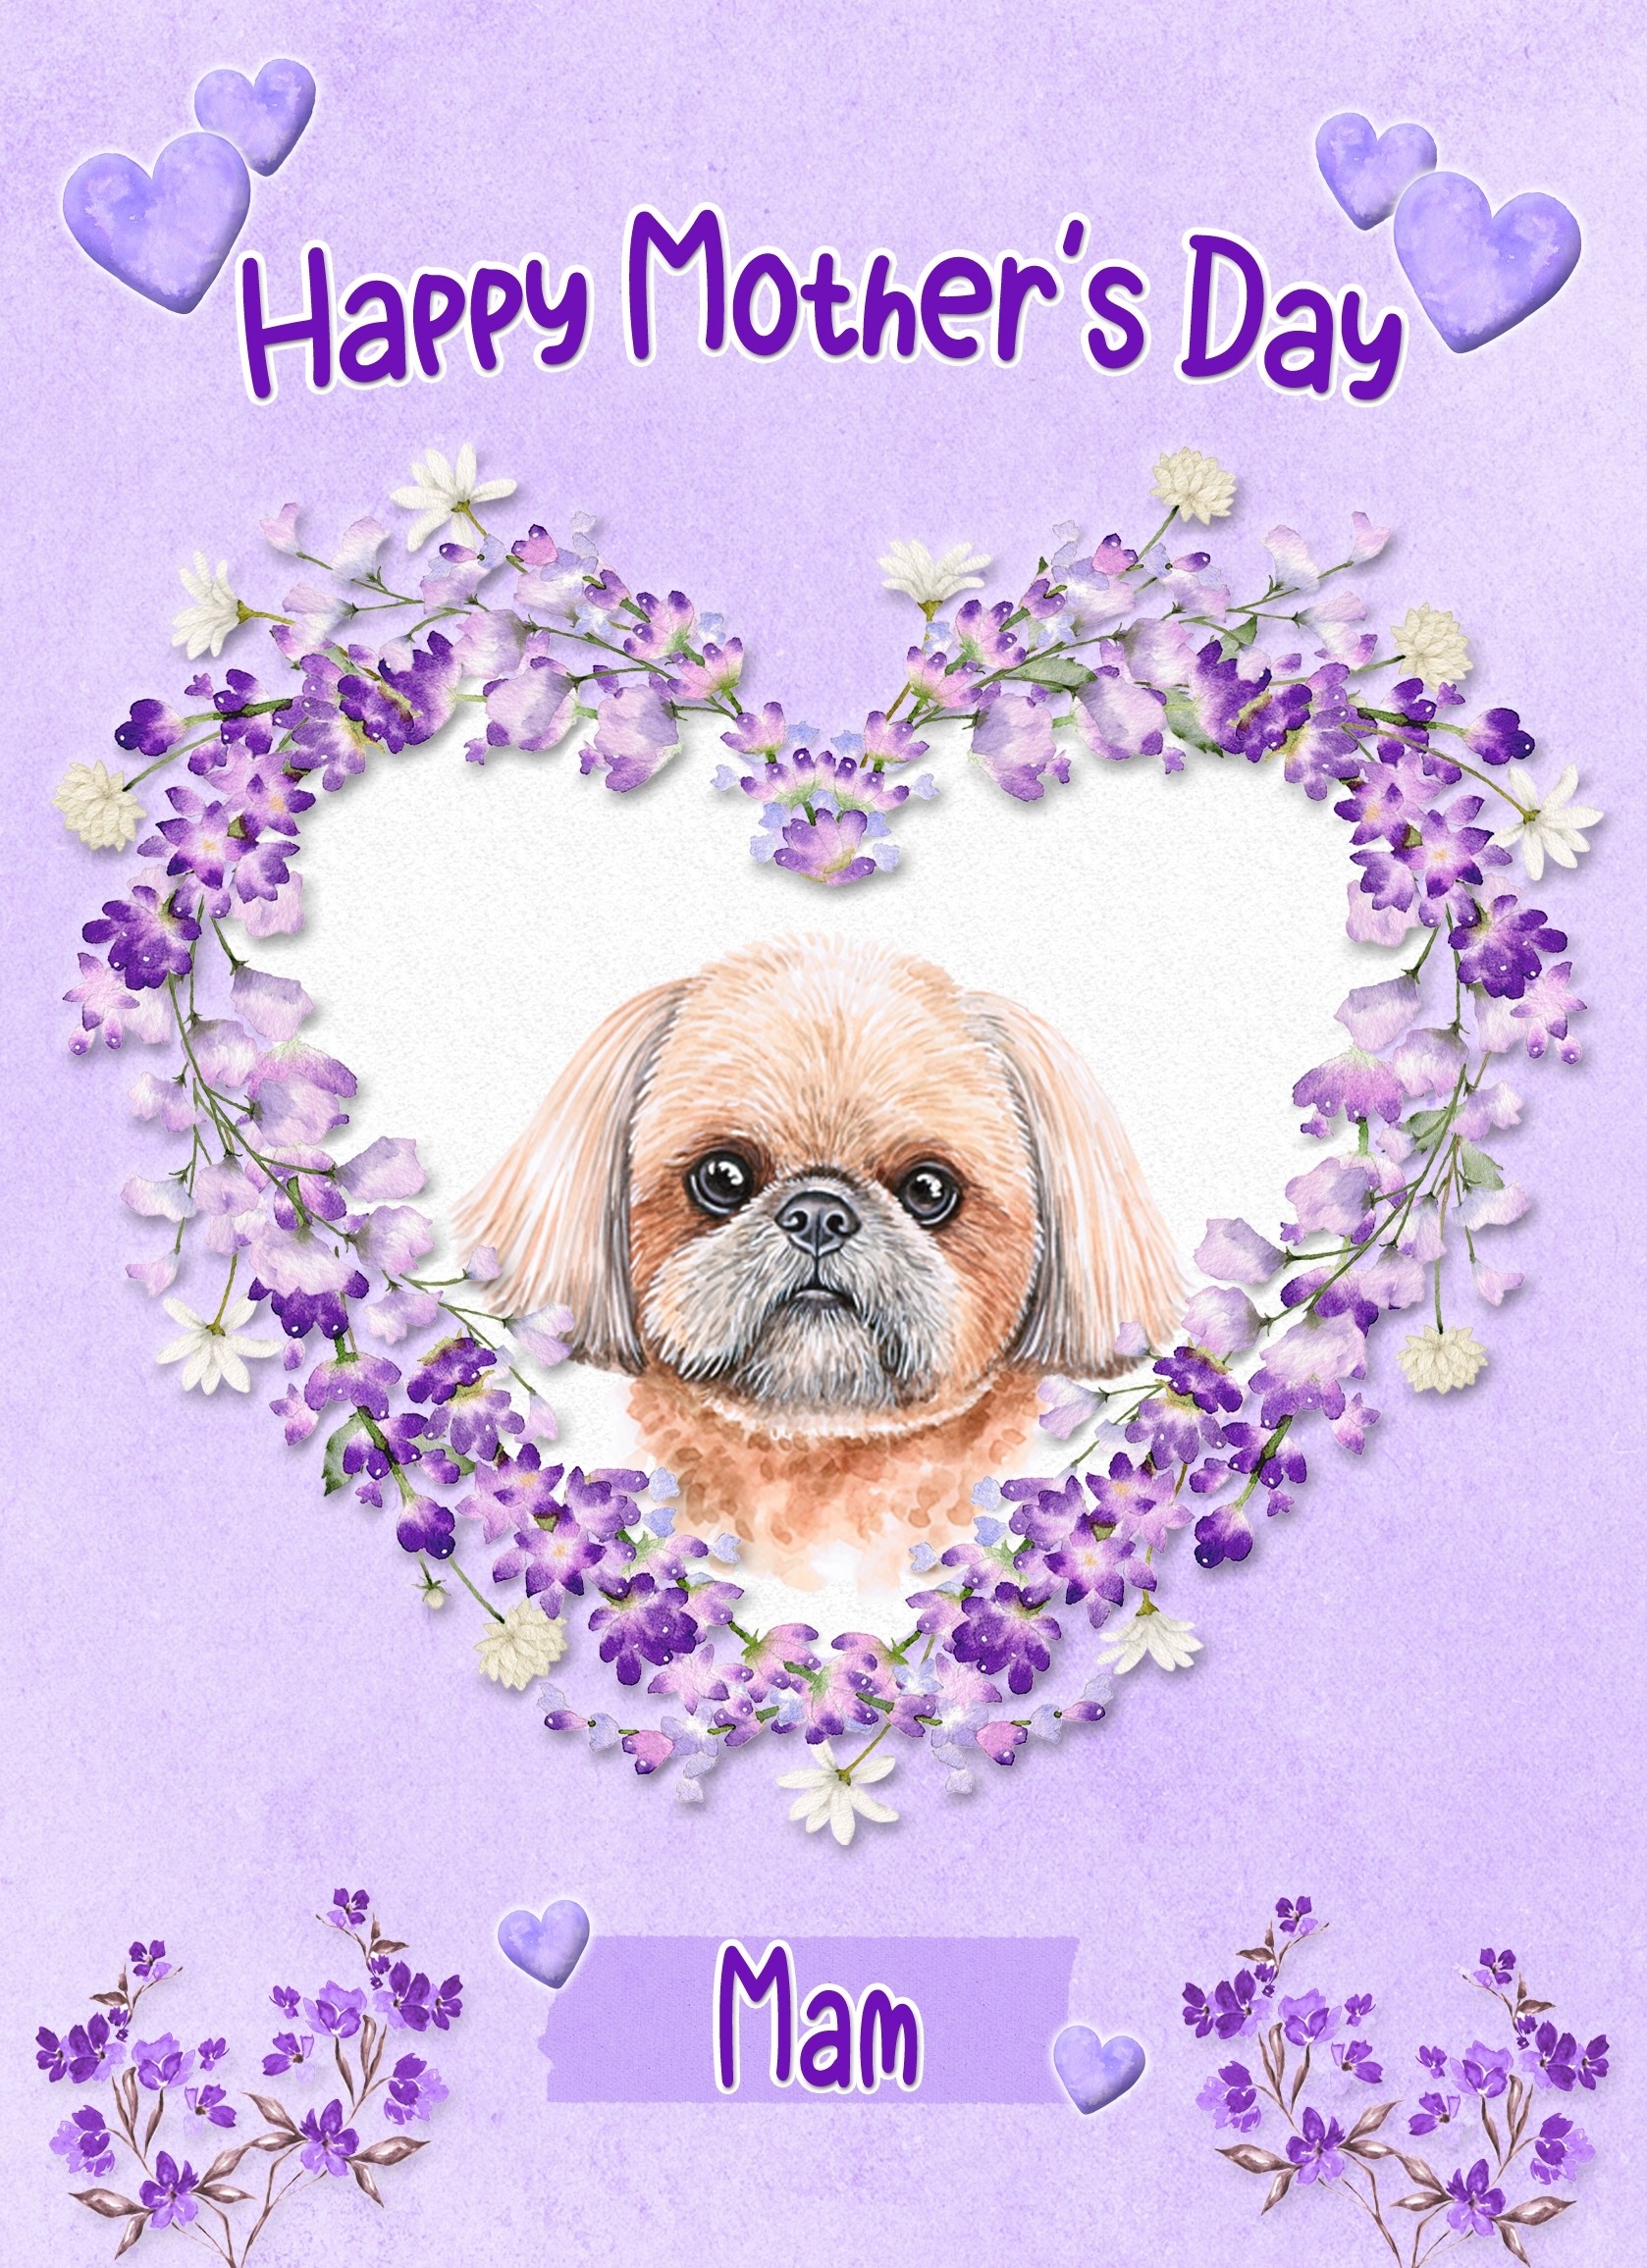 Shih Tzu Dog Mothers Day Card (Happy Mothers, Mam)